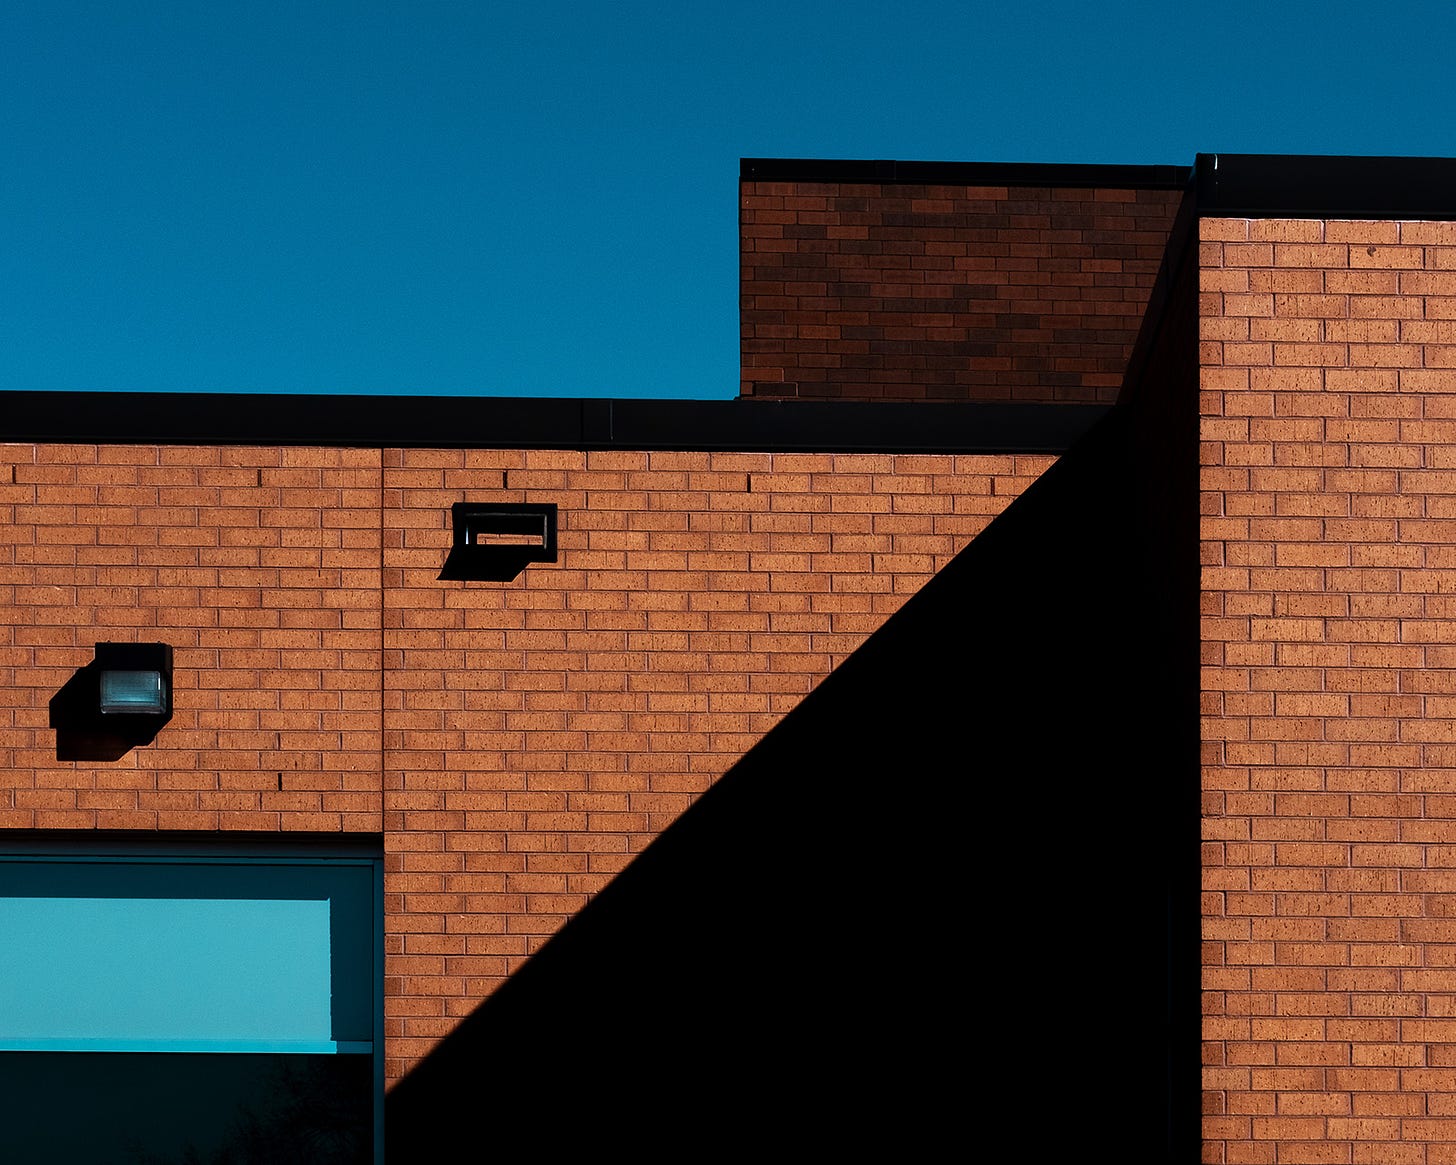 The facade of an orange brick building is covered with shadows under a clear blue sky